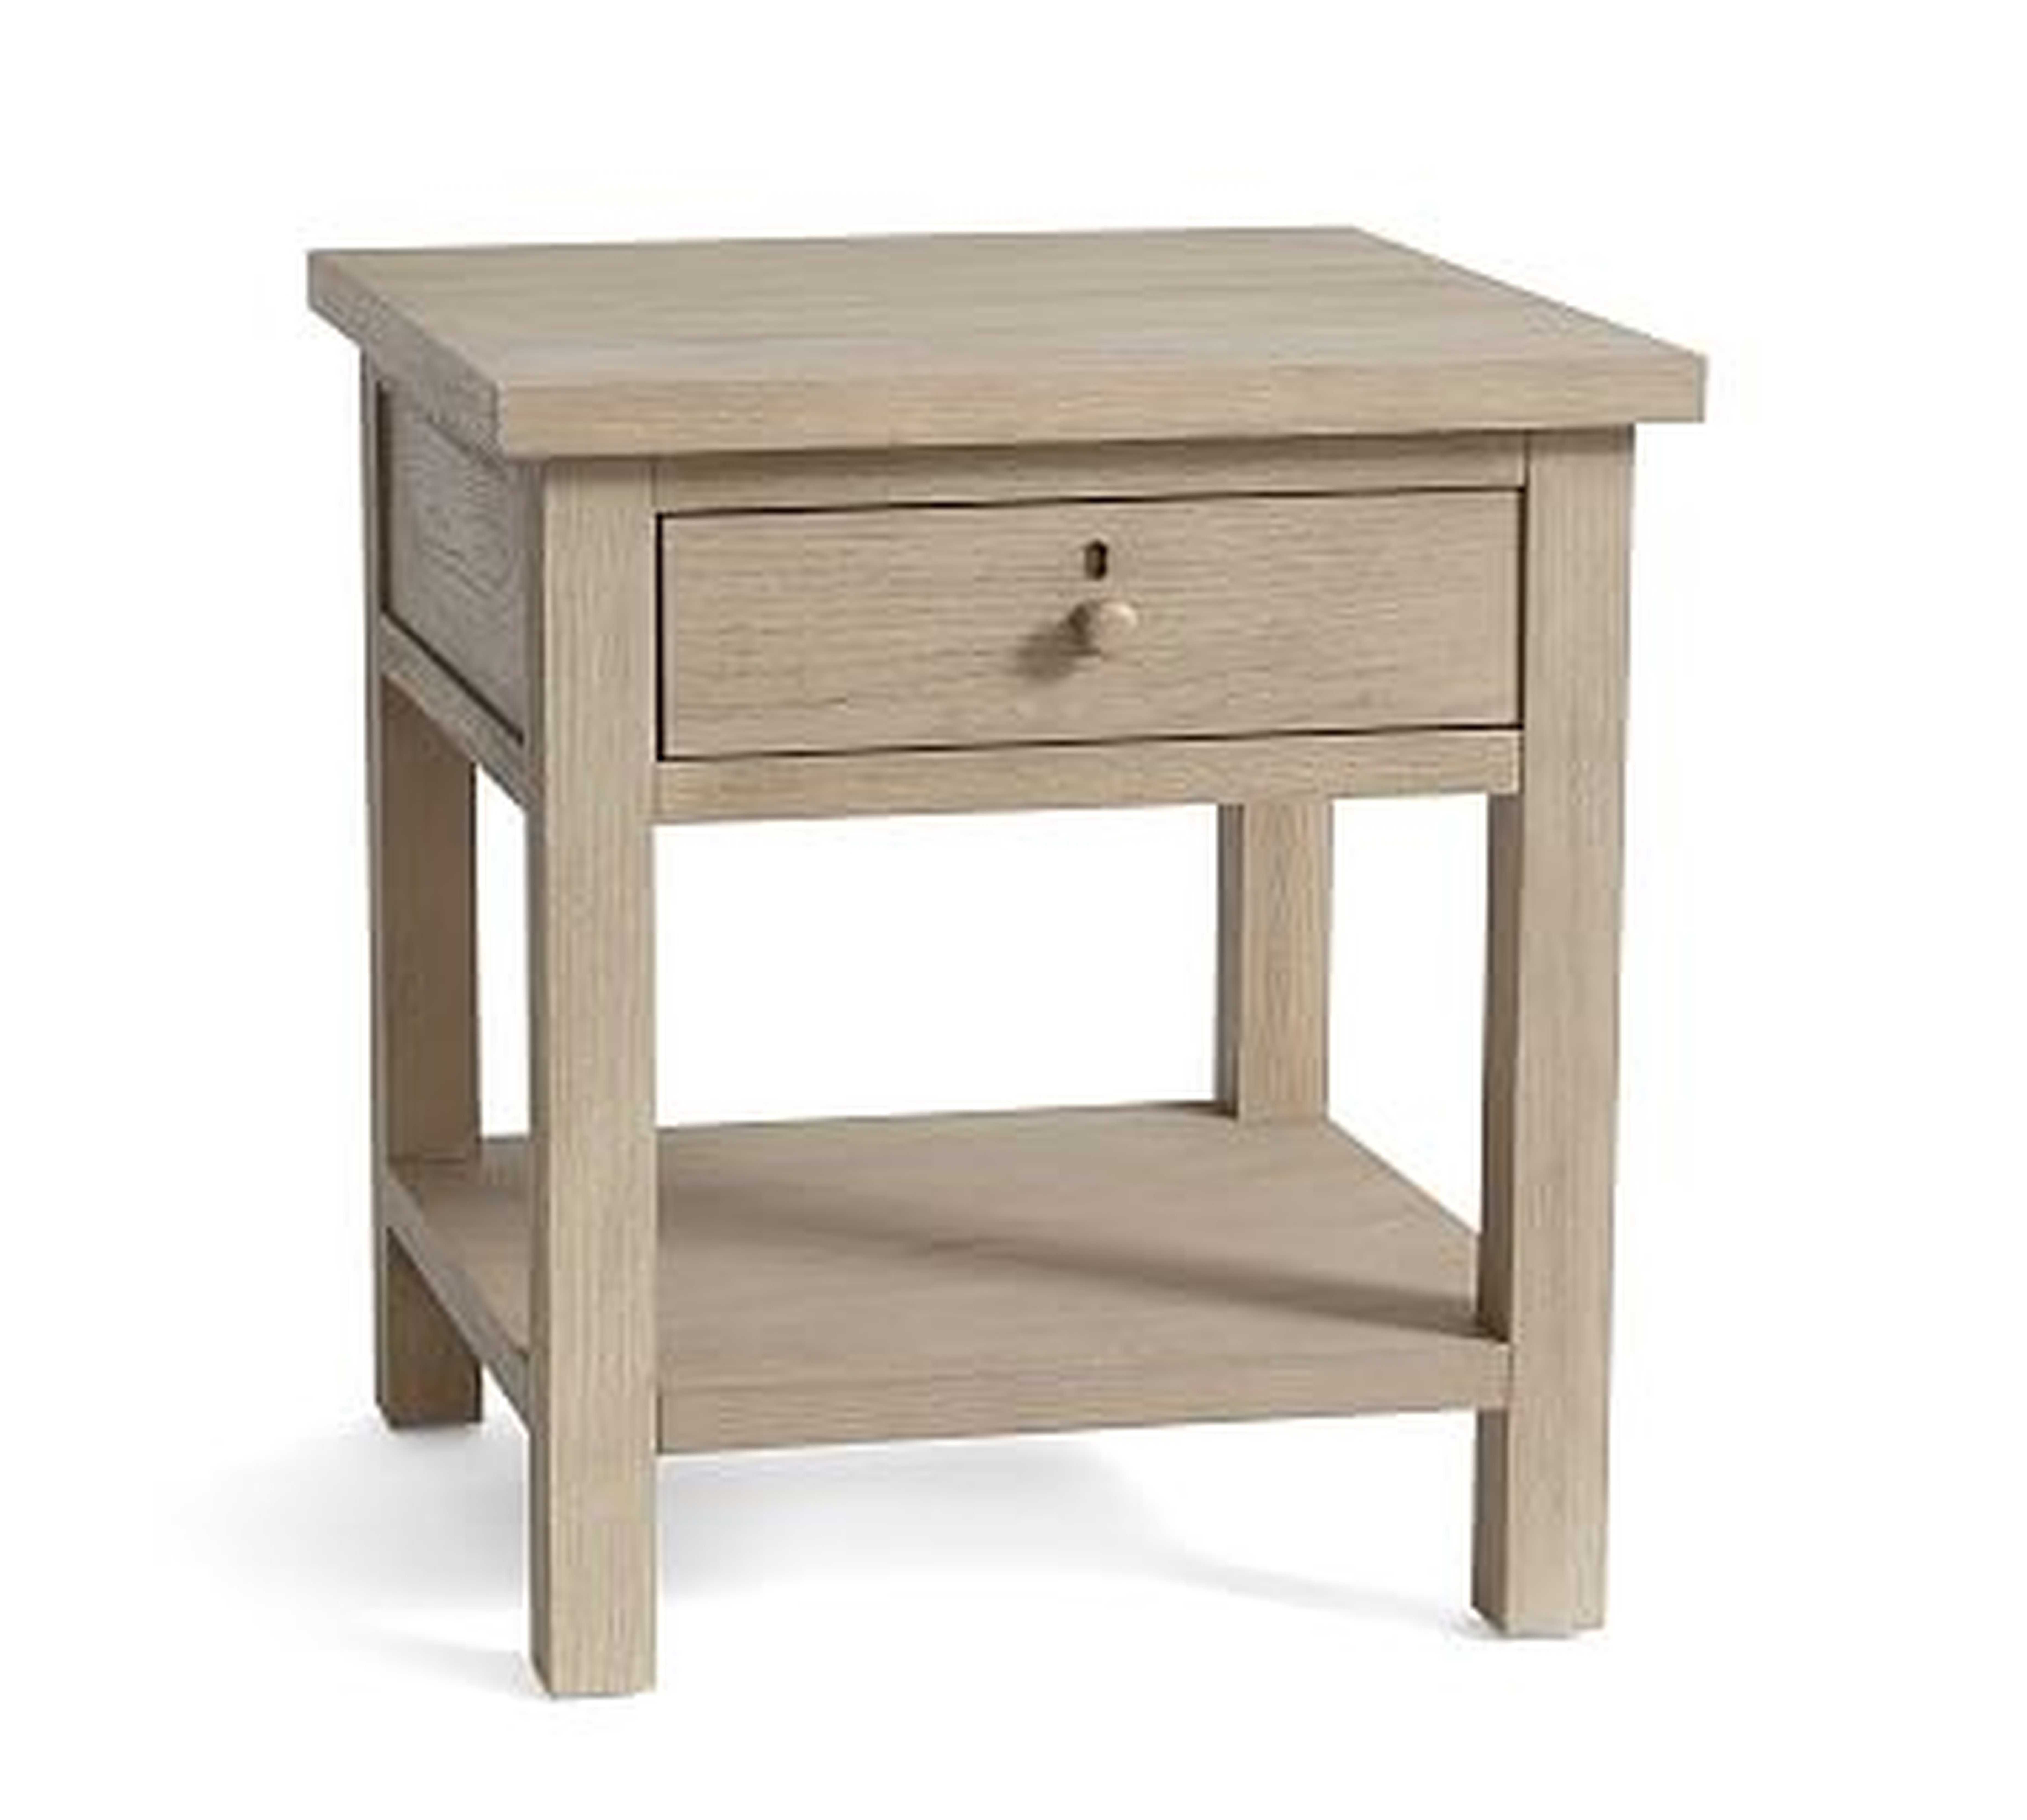 Farmhouse 22" End Table with Drawer, Gray Wash - Pottery Barn